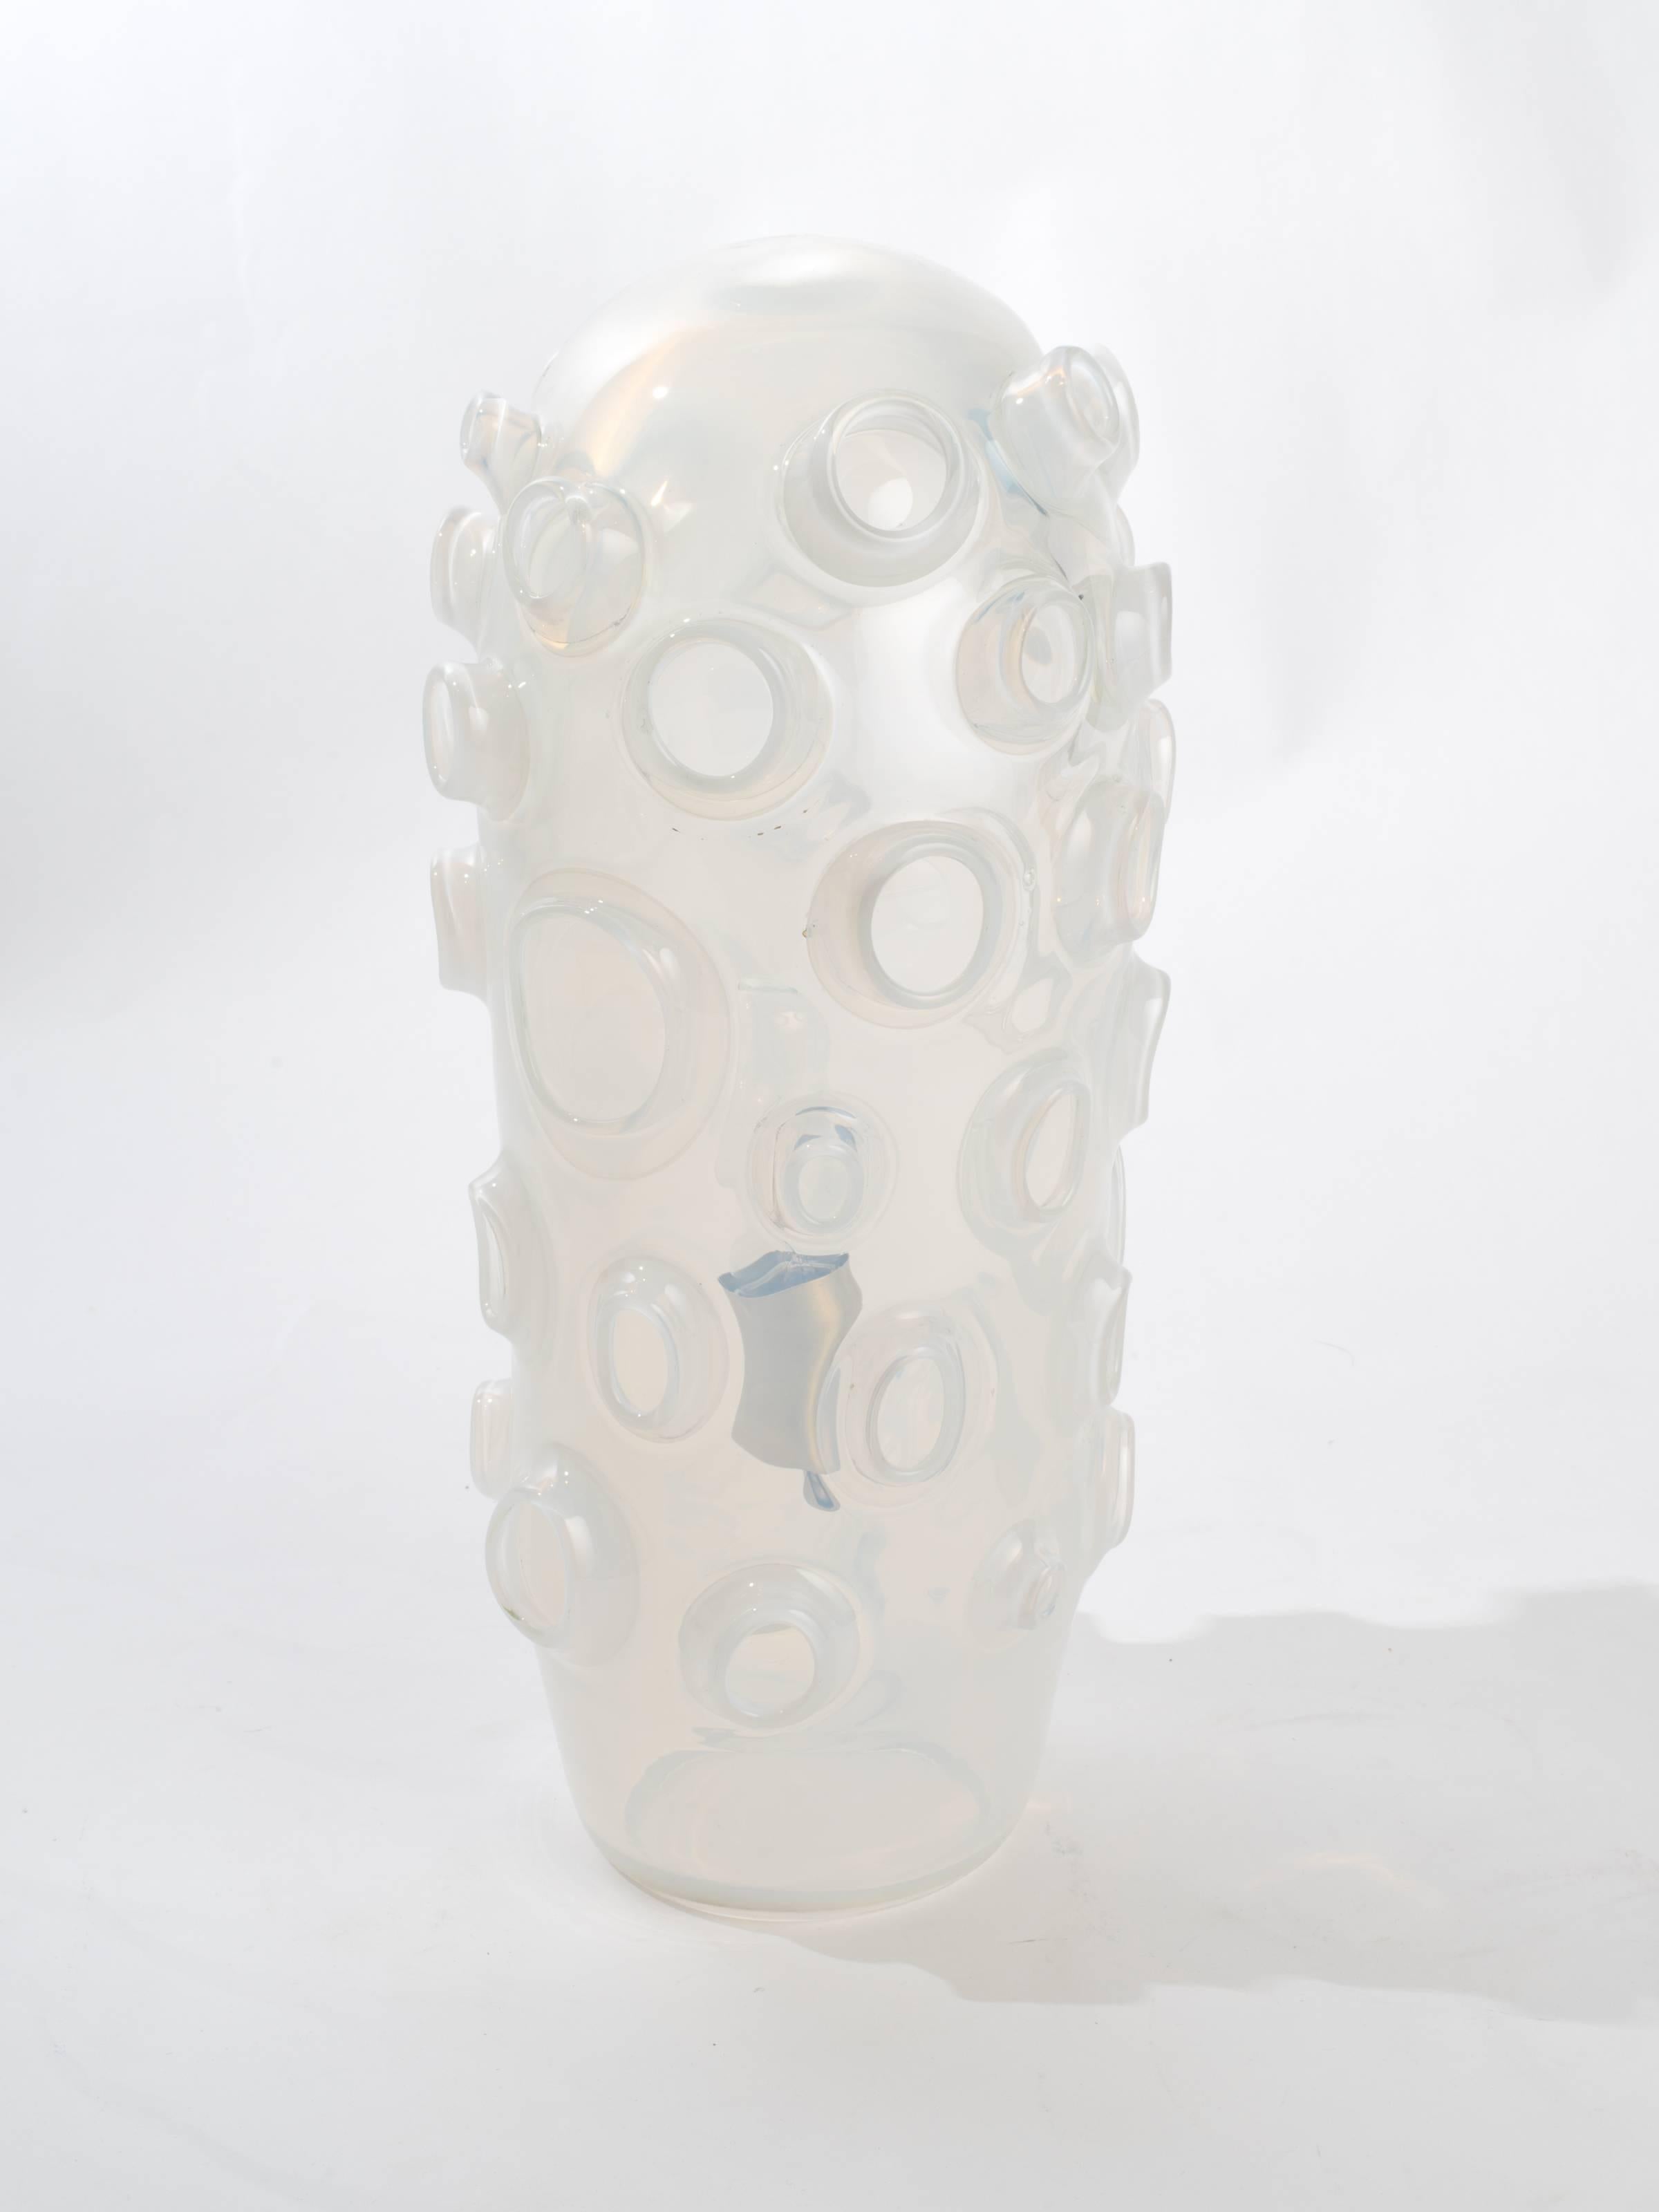 Large handblown art glass lamp from the series 